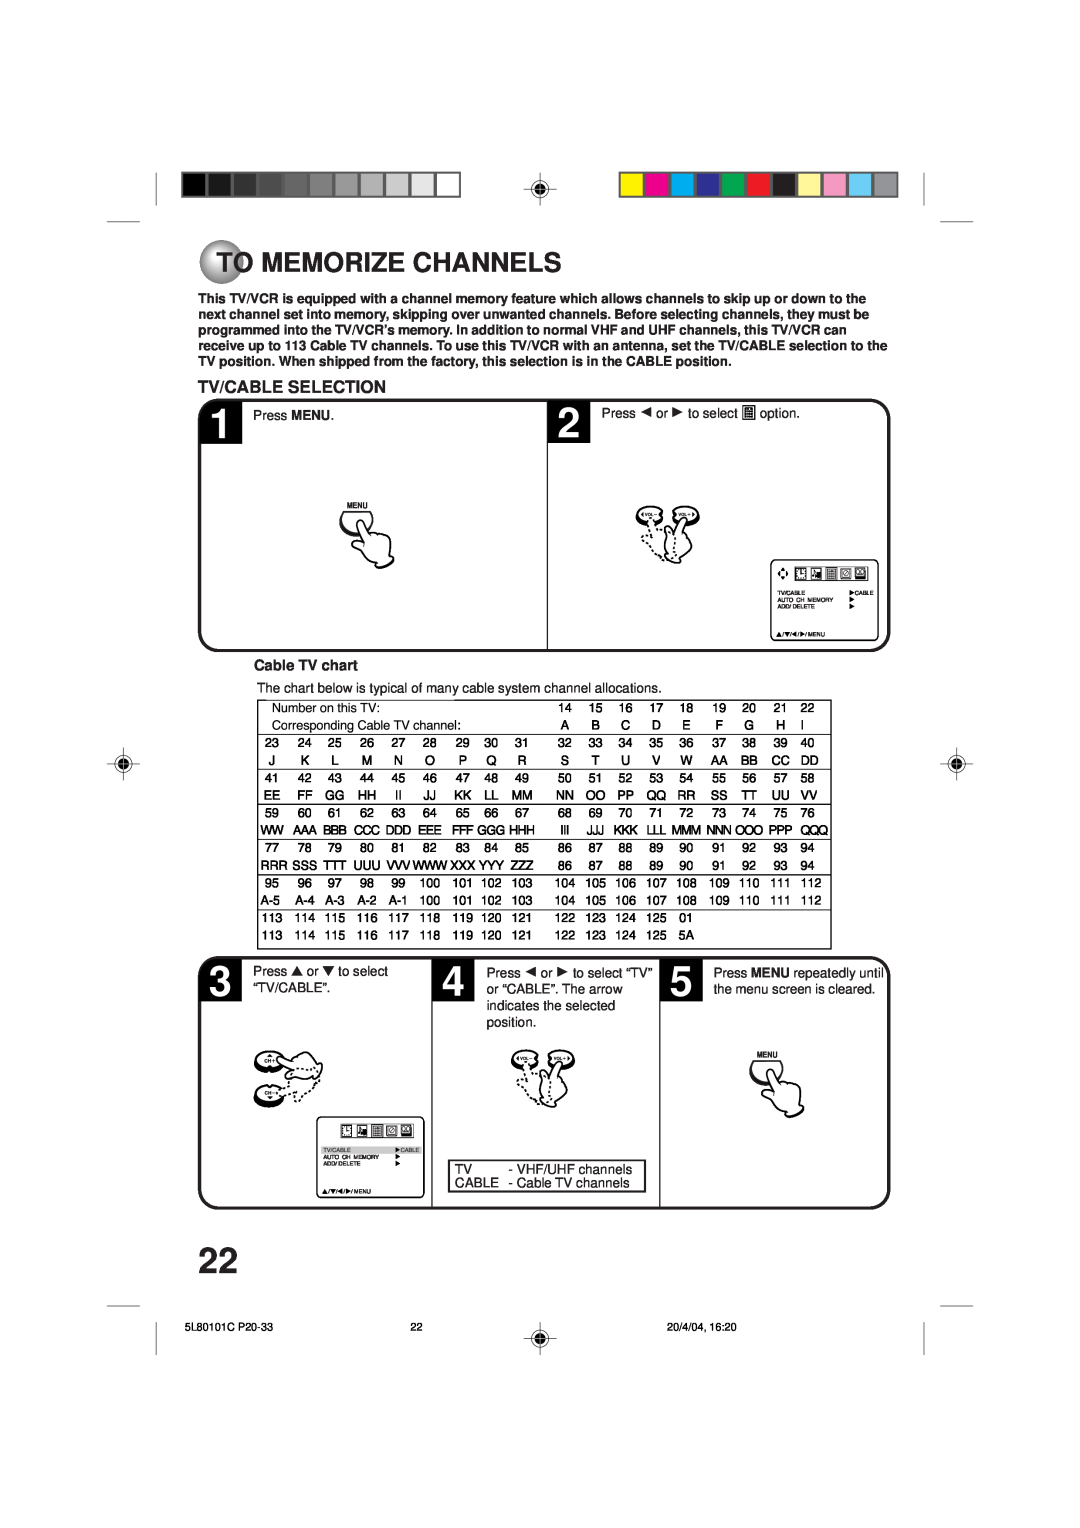 Toshiba MV13P2 owner manual To Memorize Channels, Tv/Cable Selection, Cable TV chart 